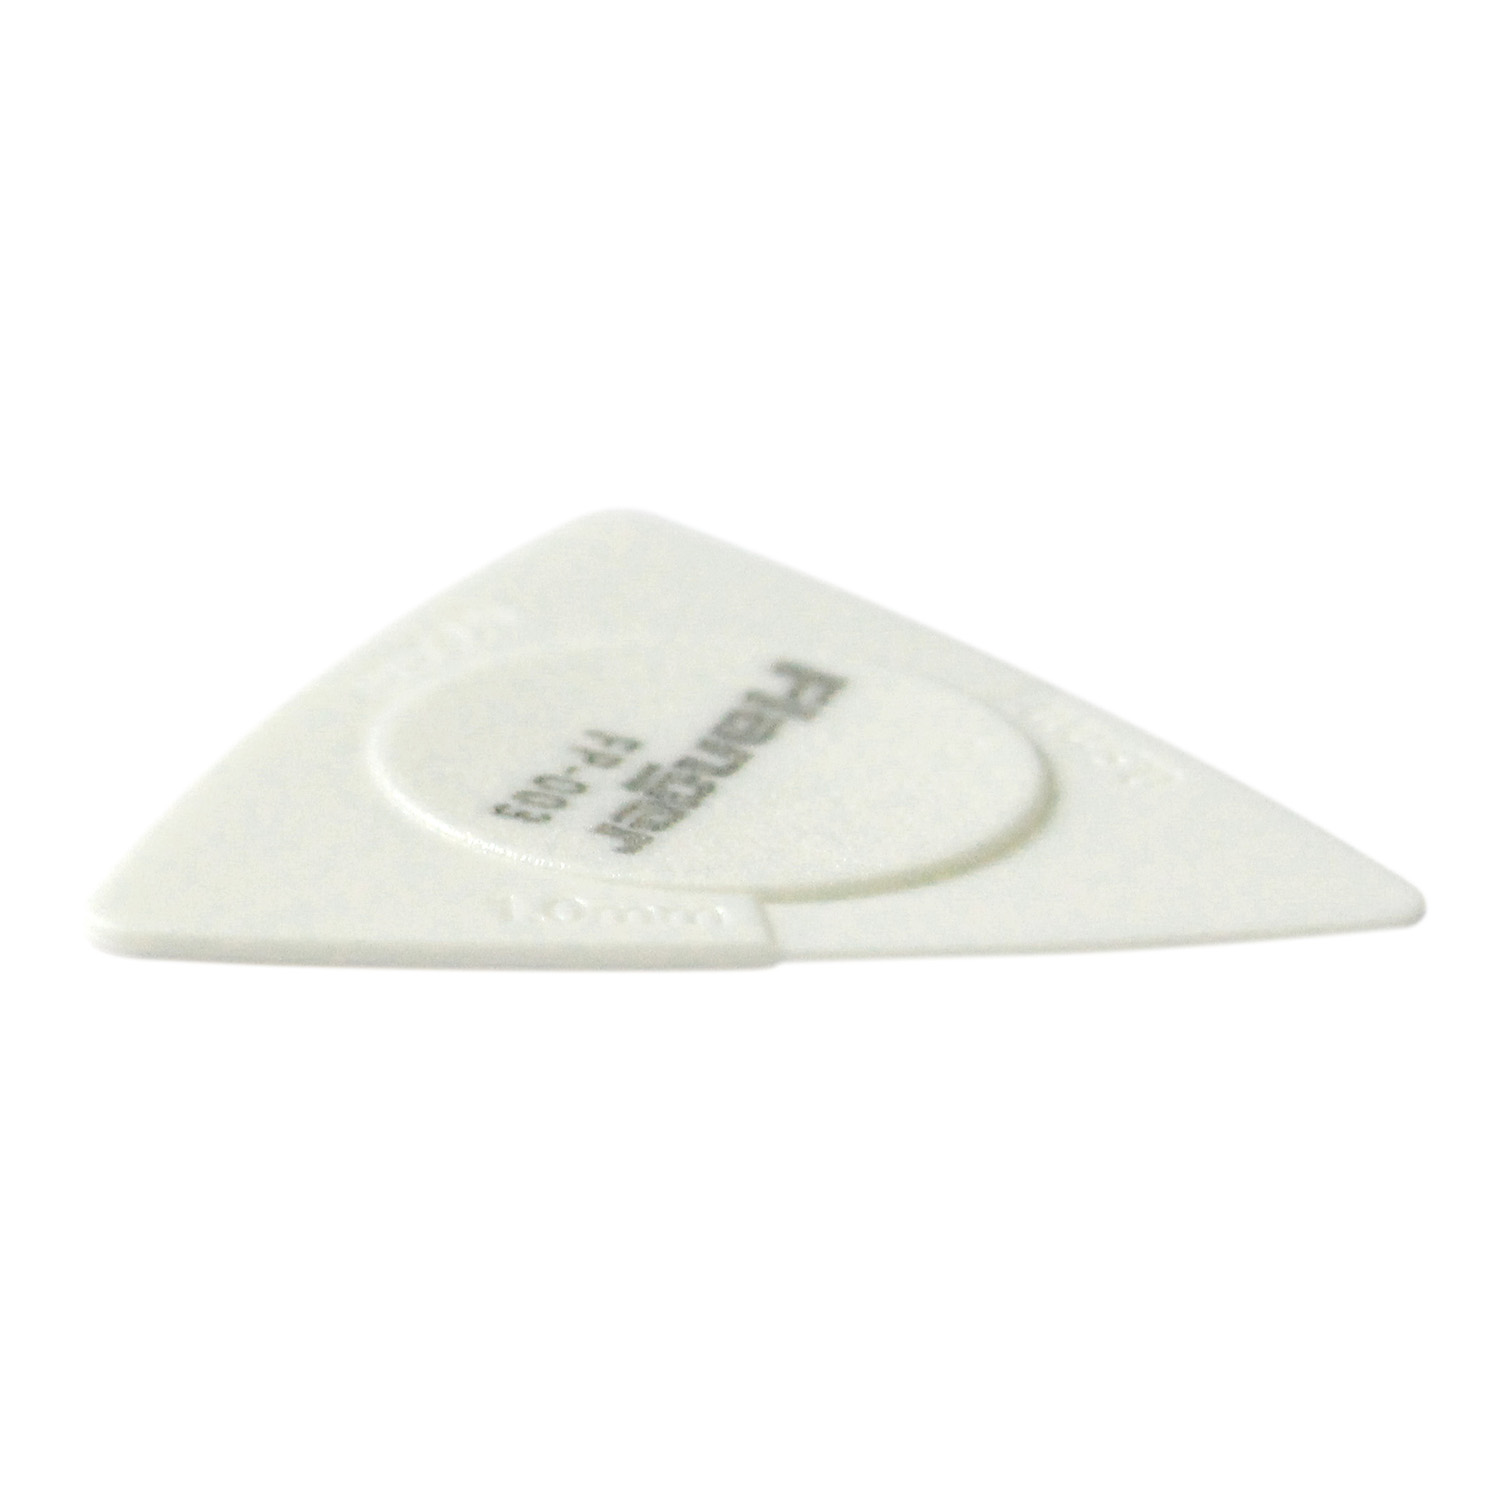 10pcs Flanger Triangle-Guitar picks 1.0 0.75 0.5 mm Thickness in PC + ABS Material Antislip Style Picks